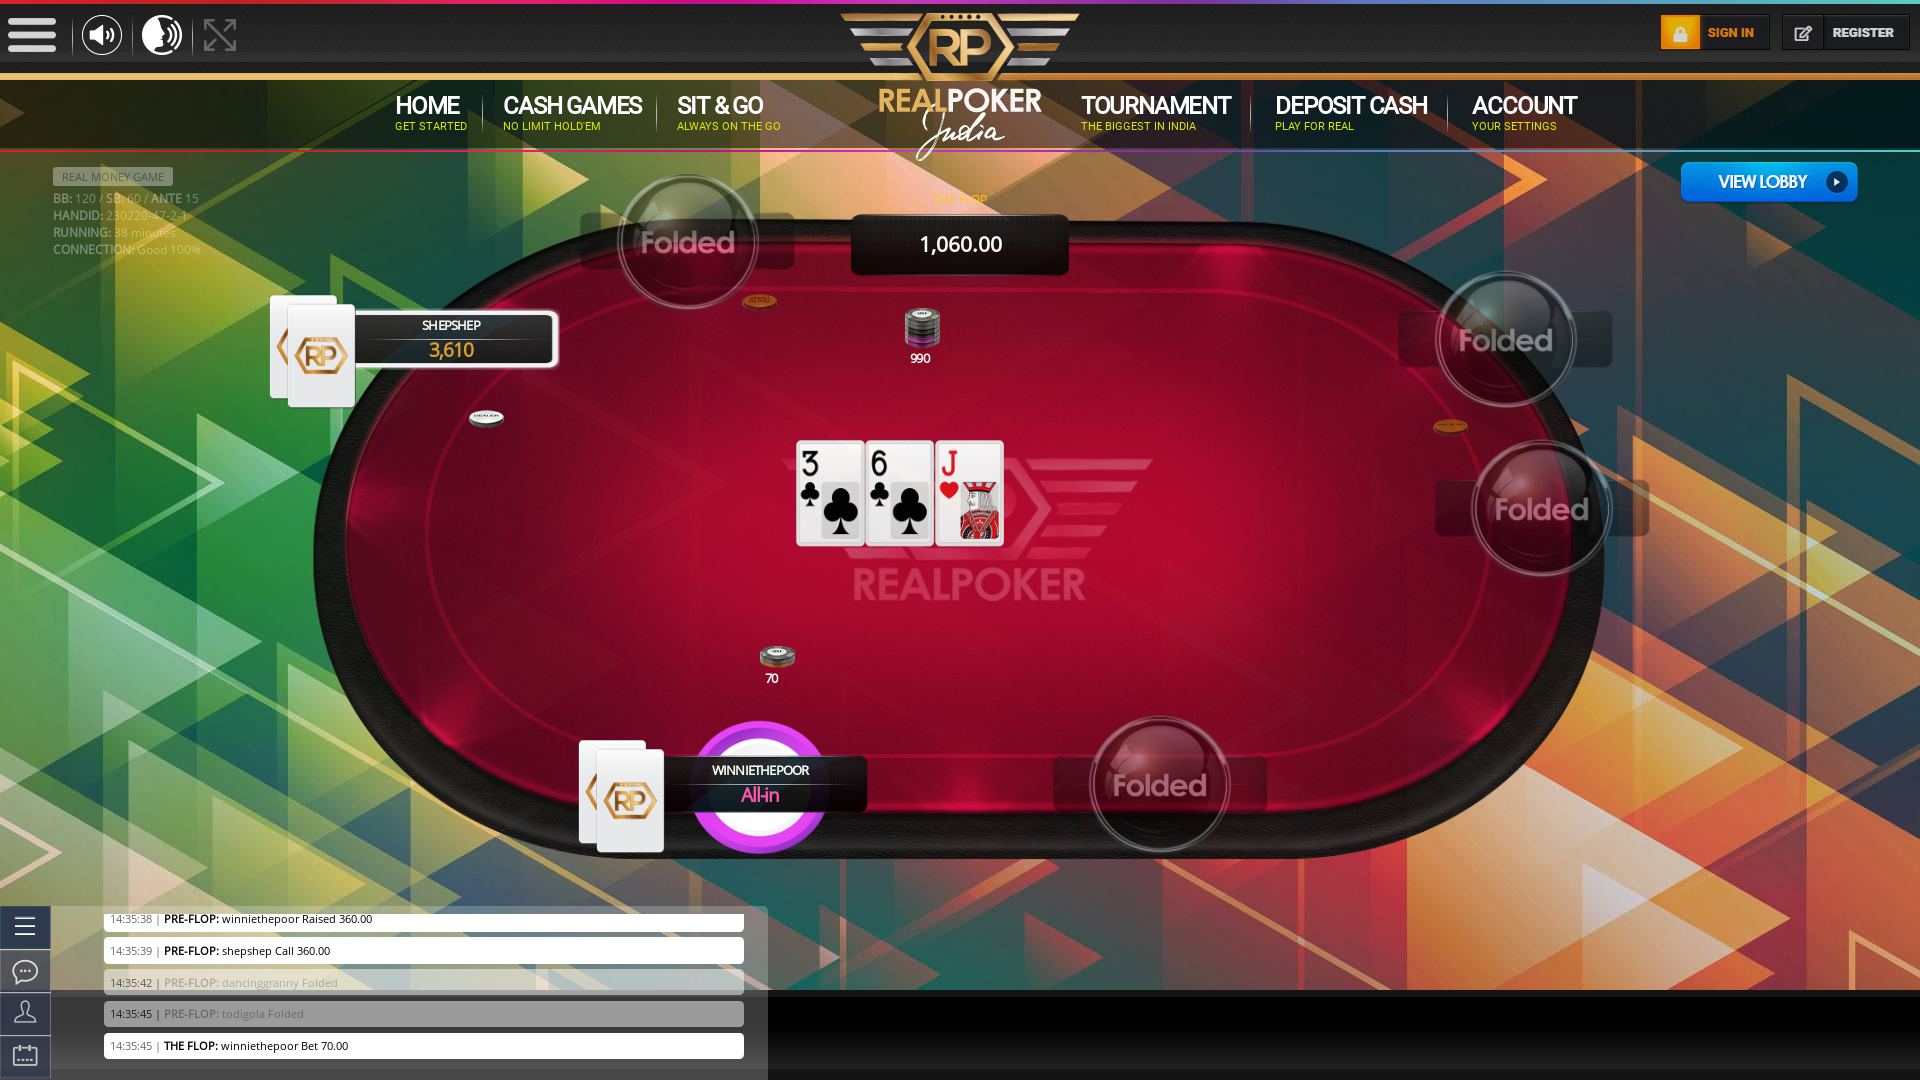 Real Indian poker on a 10 player table in the 37th minute of the game